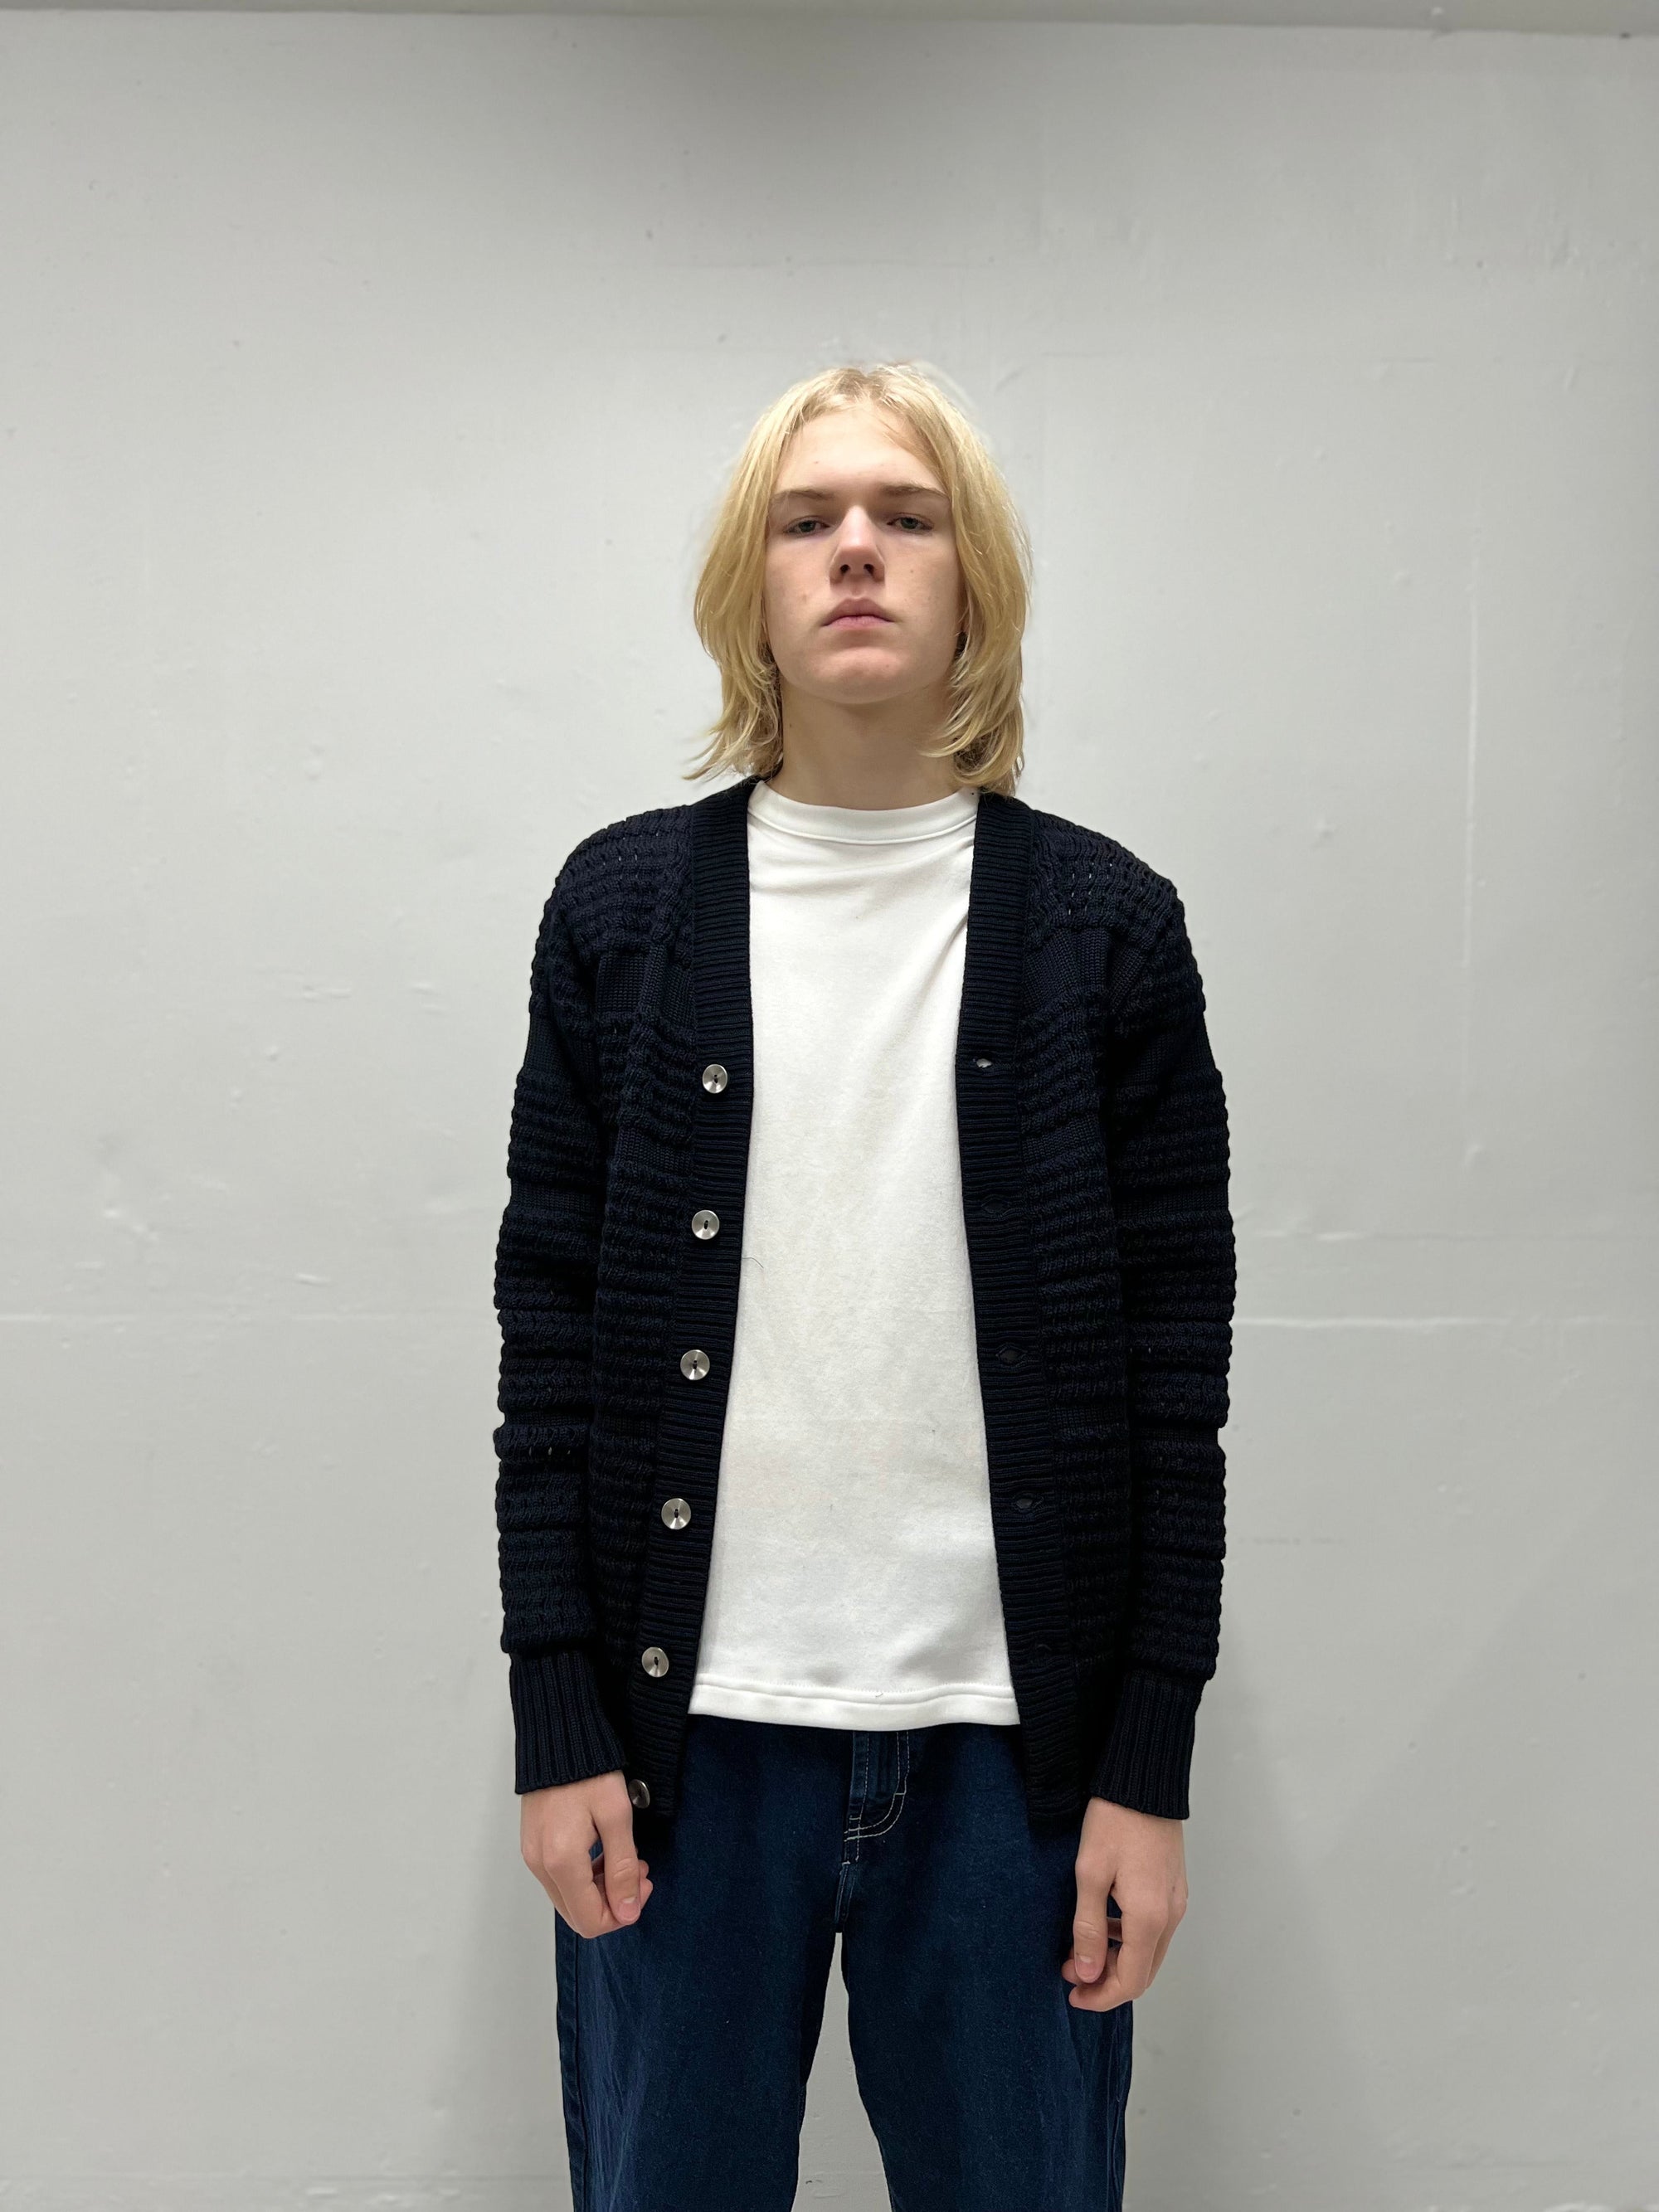 S. 2023 S. Distributed S. blue | cardigan, HERNING N. DA#015 ] Archive navy S. – - RATIO HERNING N. [ EUR |